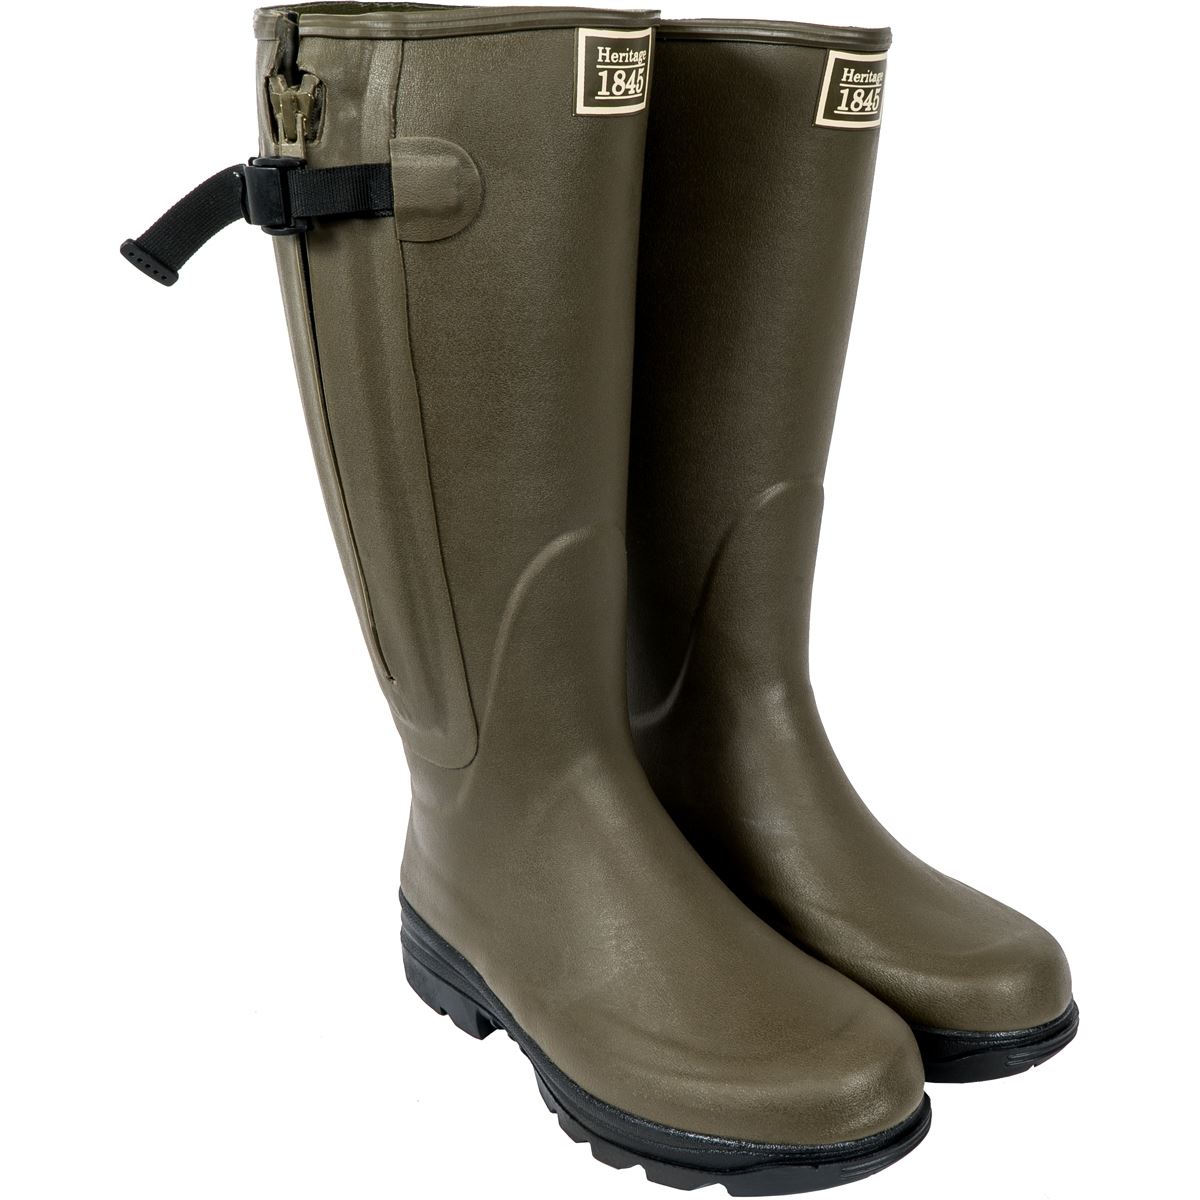 Heritage 1845 Unisex Haywood Neo Wellington Boots Questions & Answers